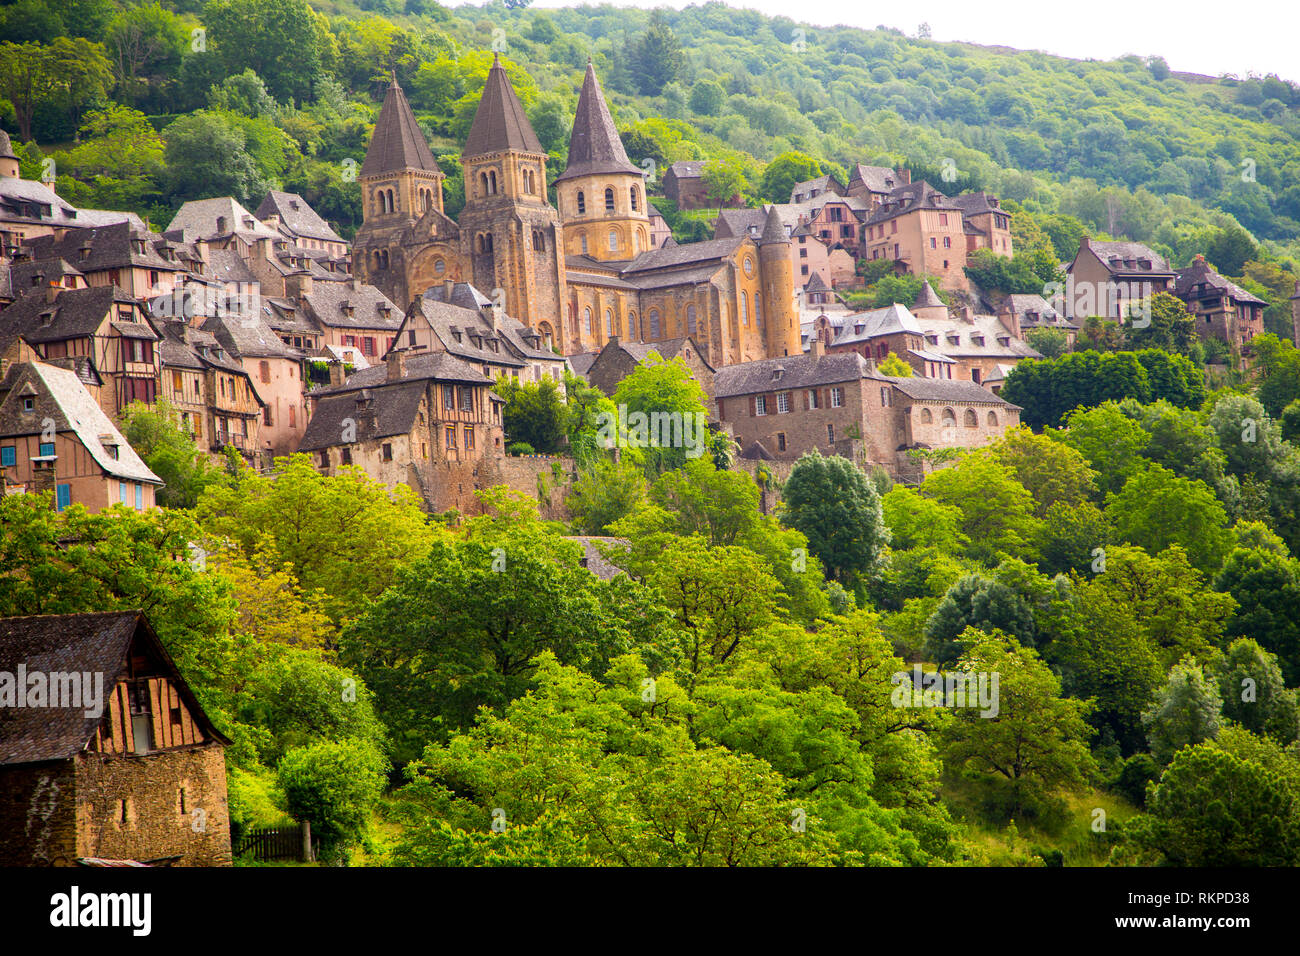 The picturesque village of Conques in France. The village is on the pilgrim route of the Camino de Santiago Compostella. Stock Photo